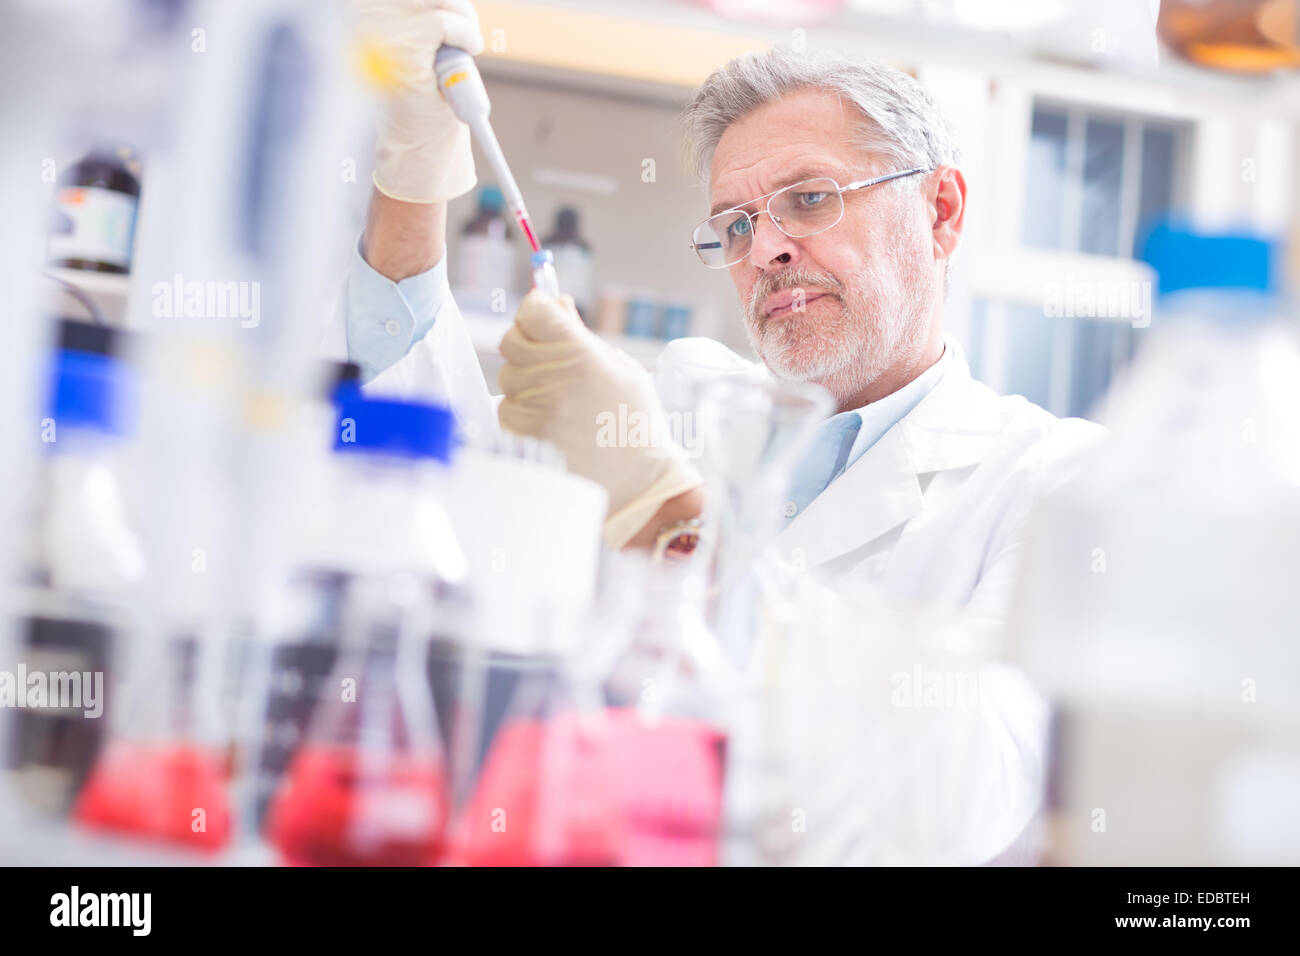 Life scientist researching in the laboratory. Stock Photo